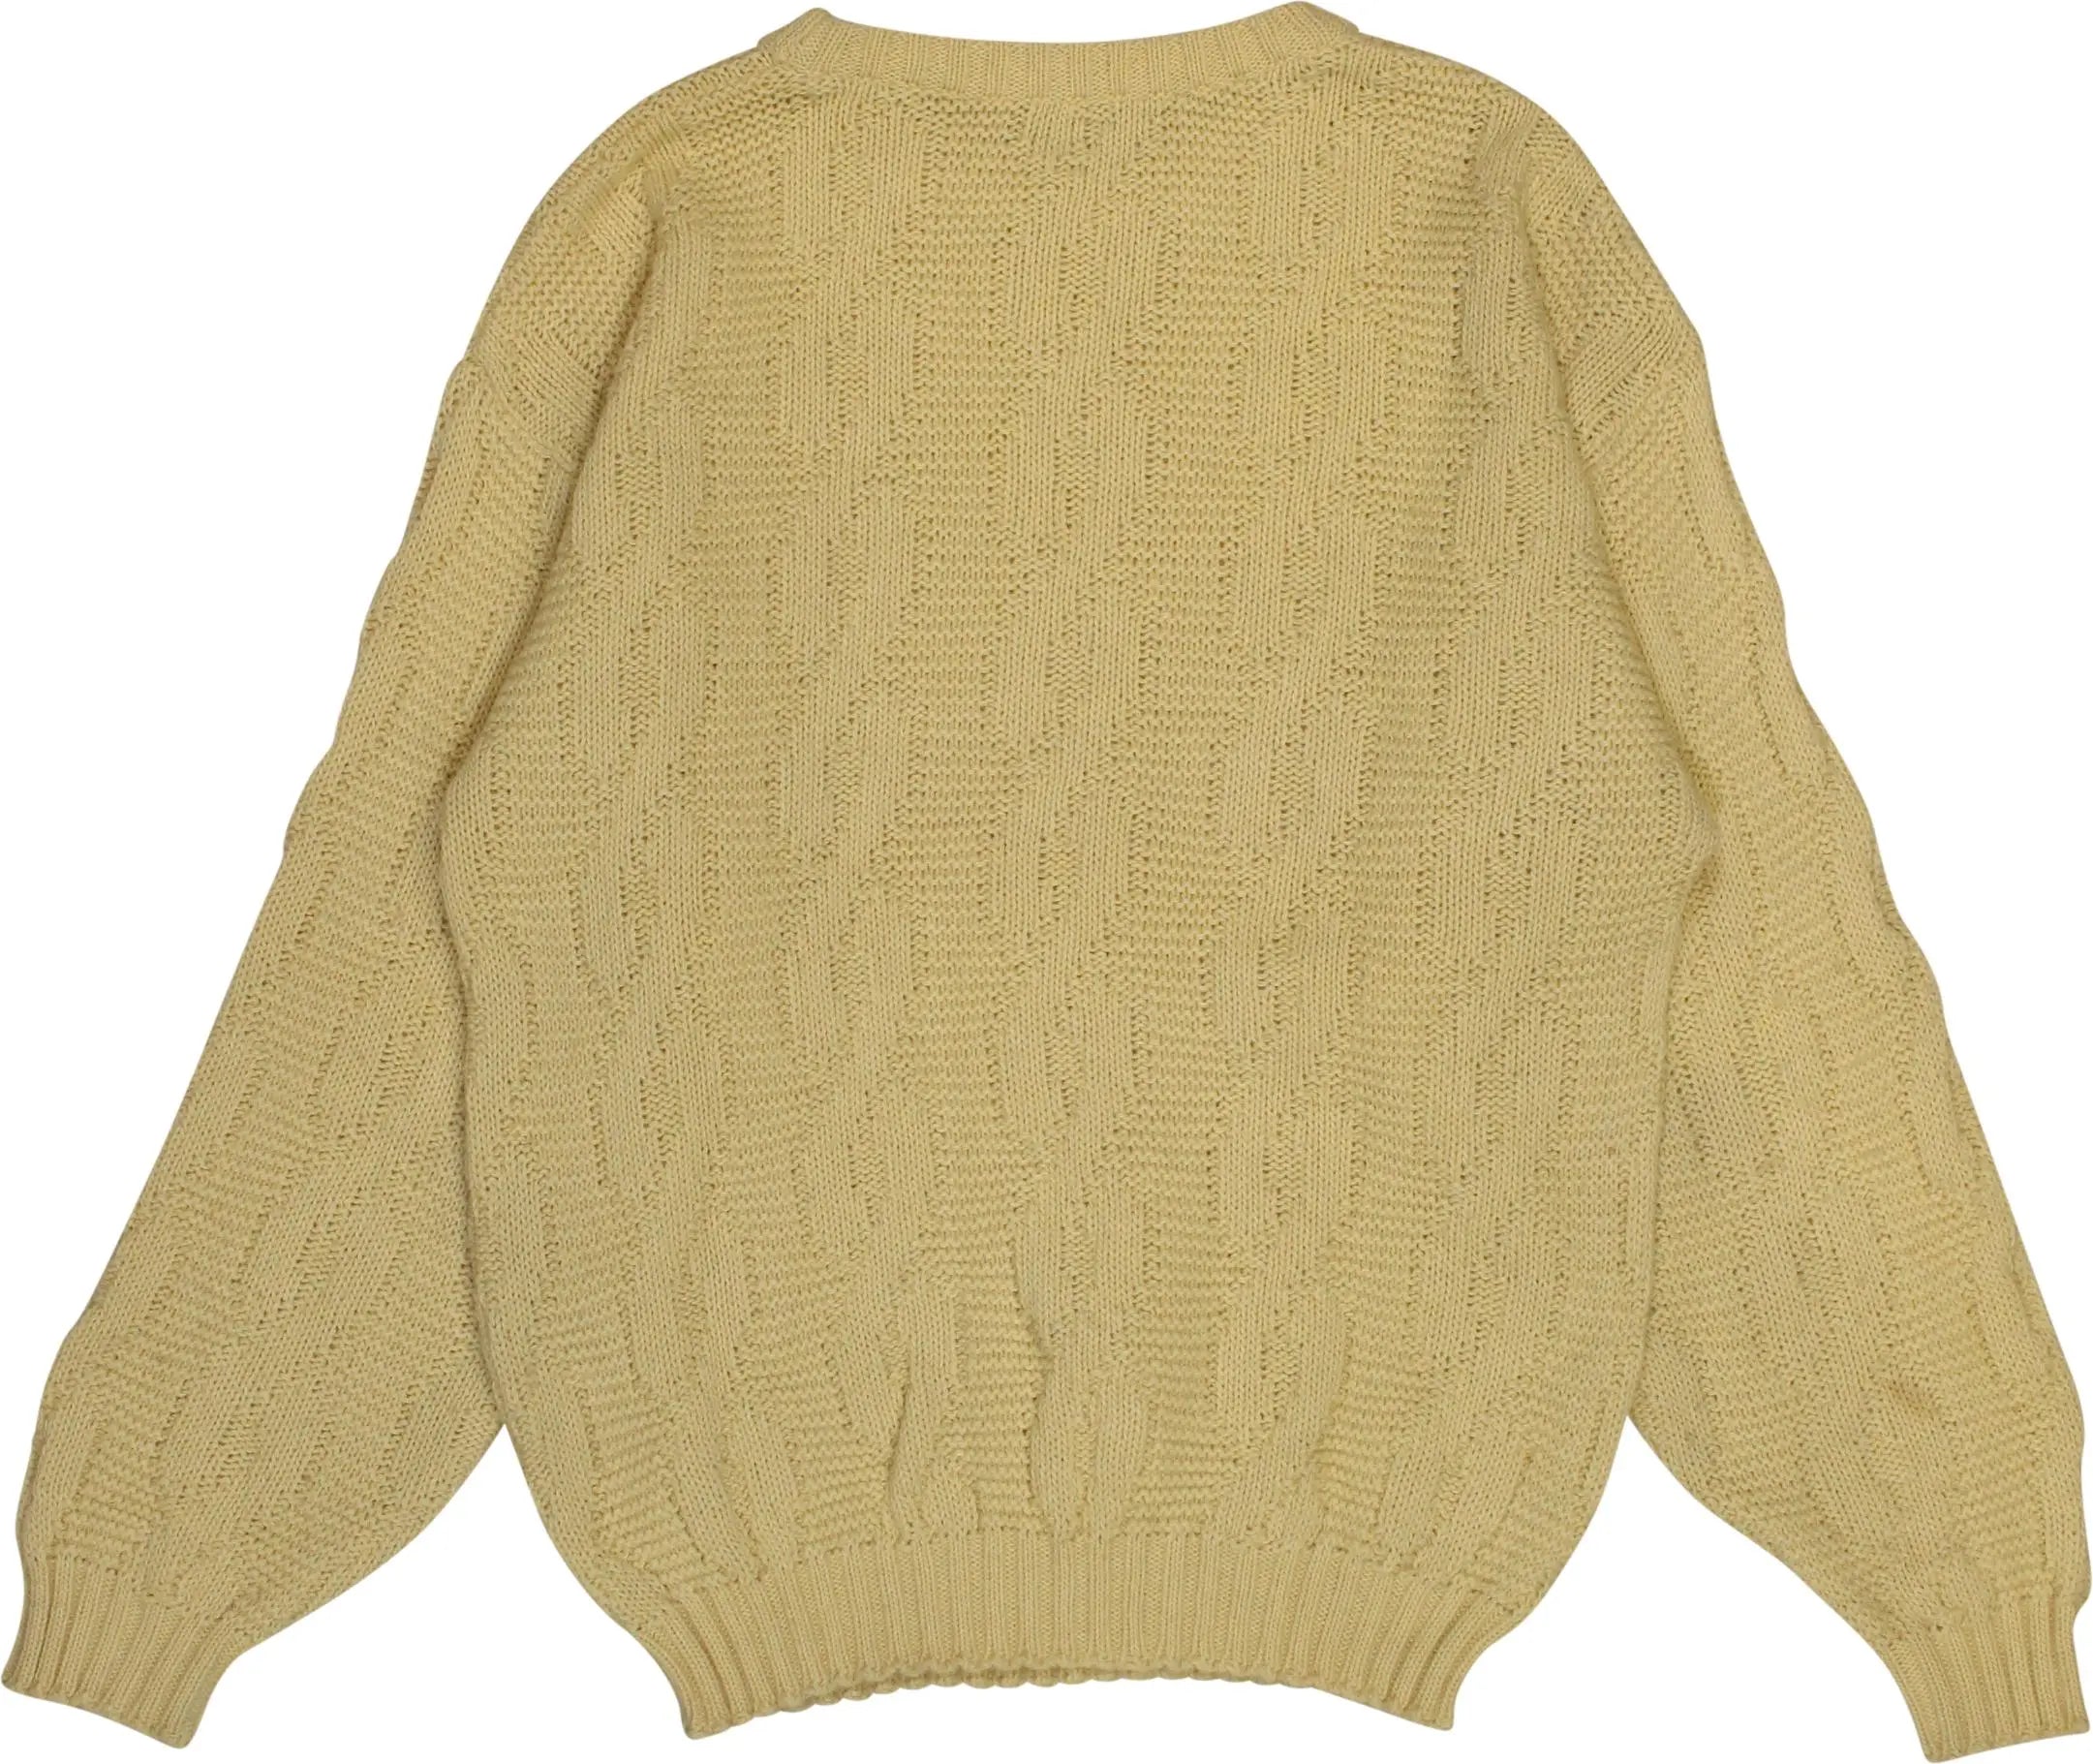 Unknown - Cream Jumper- ThriftTale.com - Vintage and second handclothing